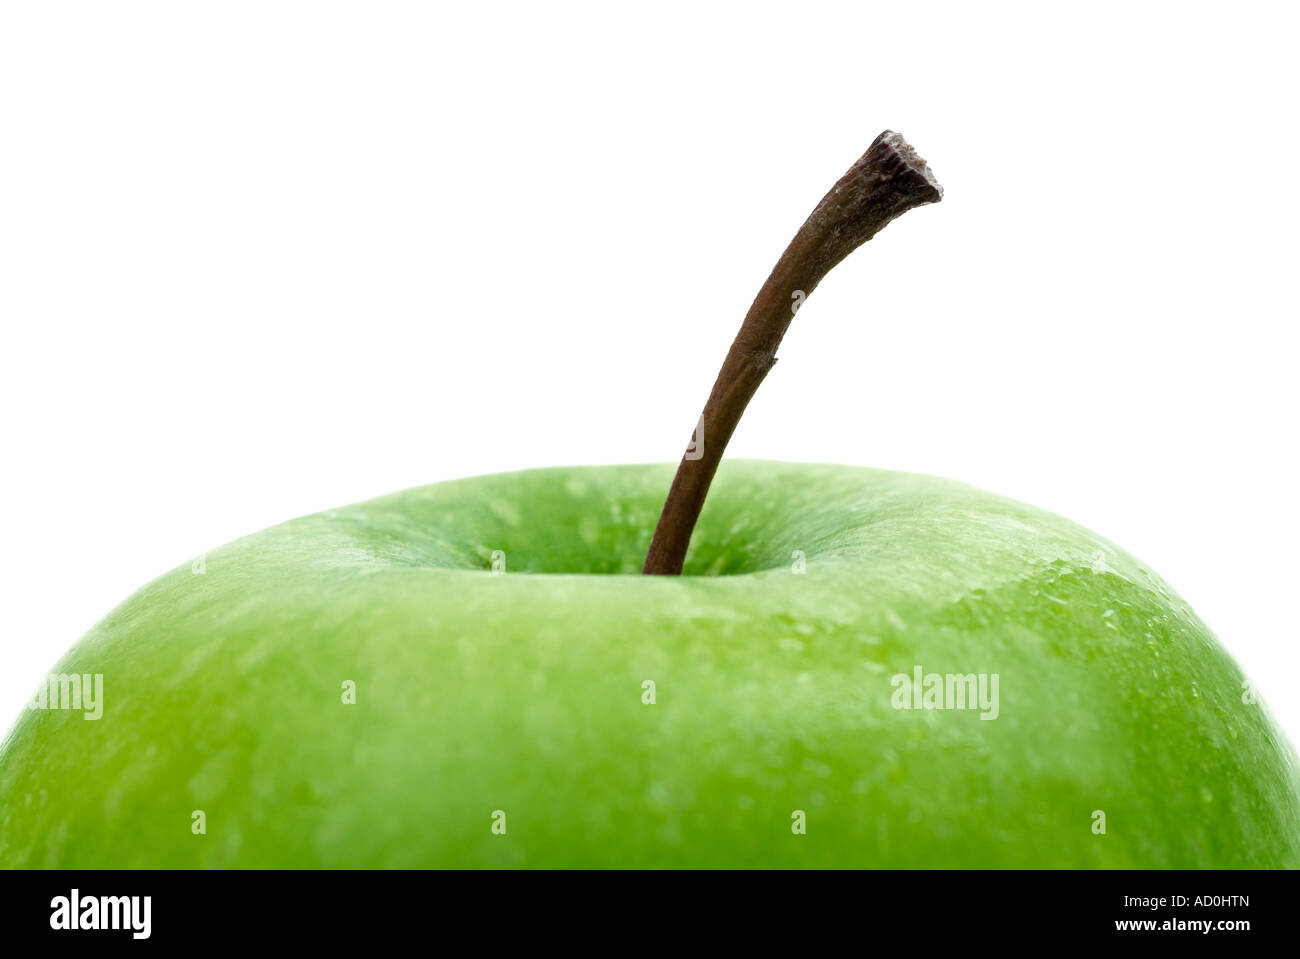 Granny Smith Apple Close Up Banque D'Images